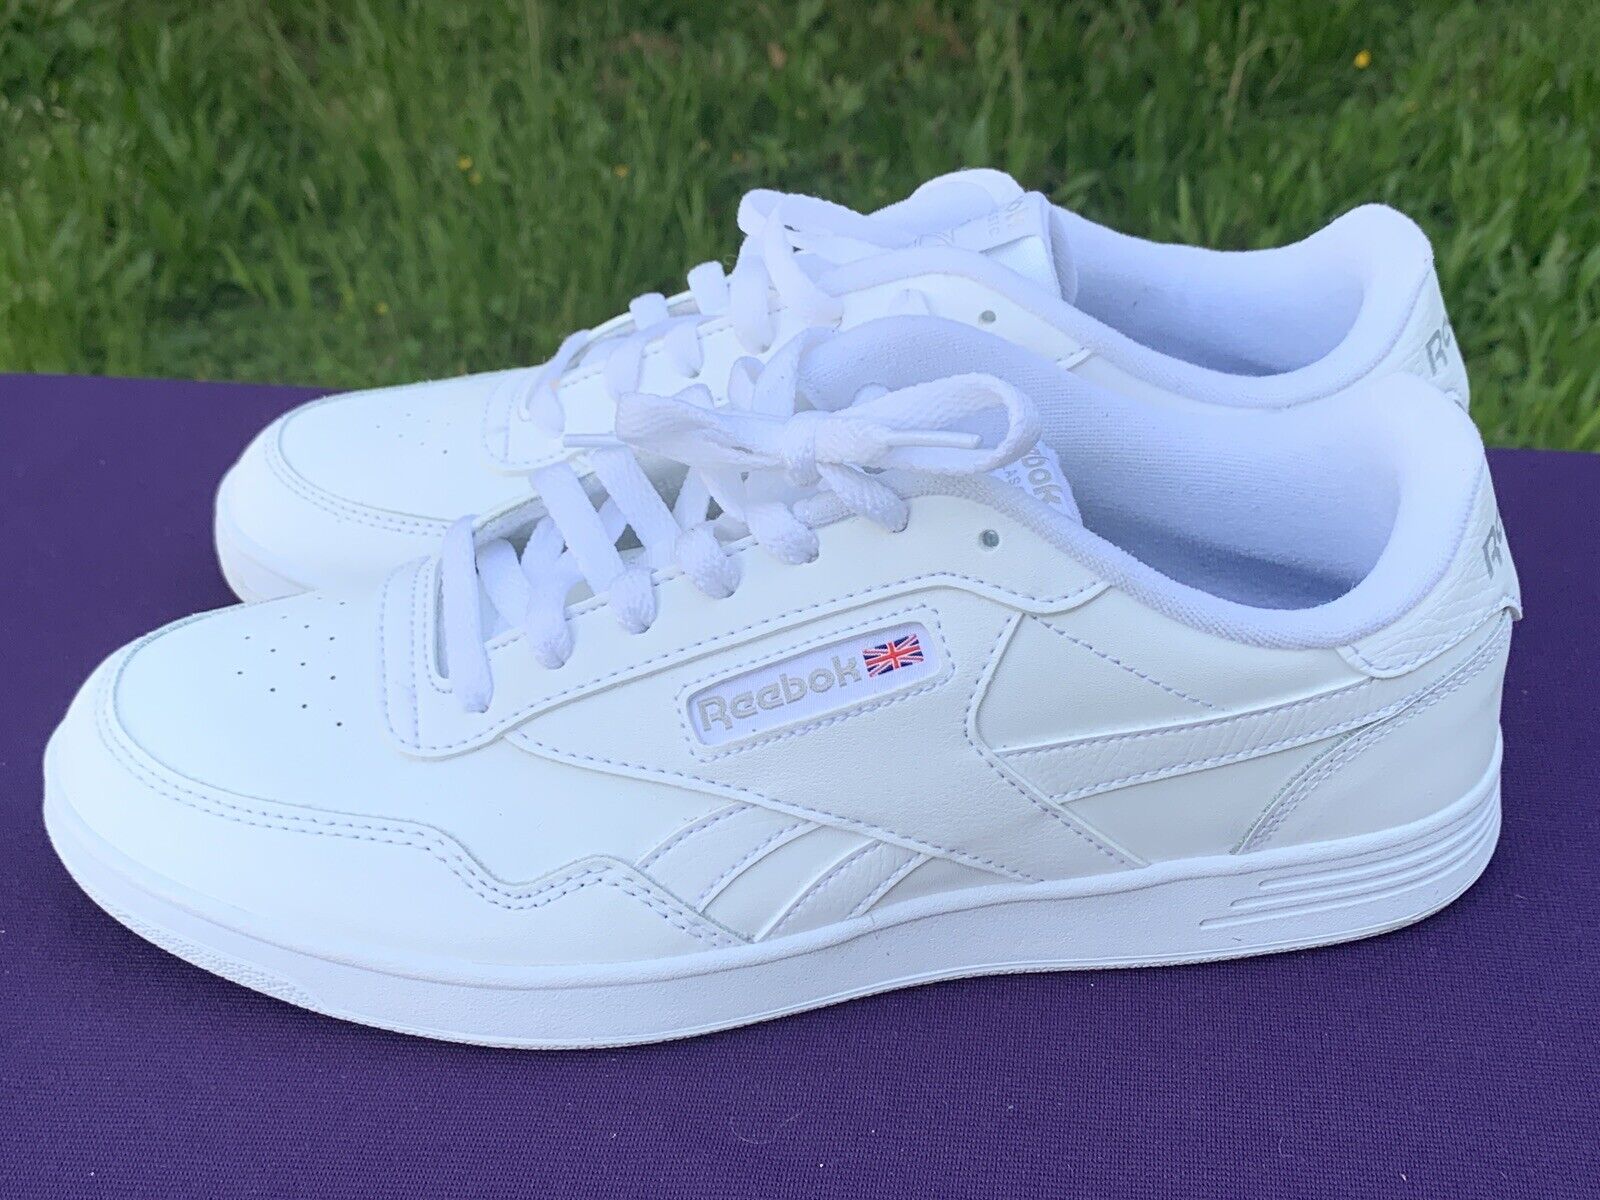 Can These Reebok Sneakers Improve Your Memory and Comfort: 10 Surprising Facts About Reebok